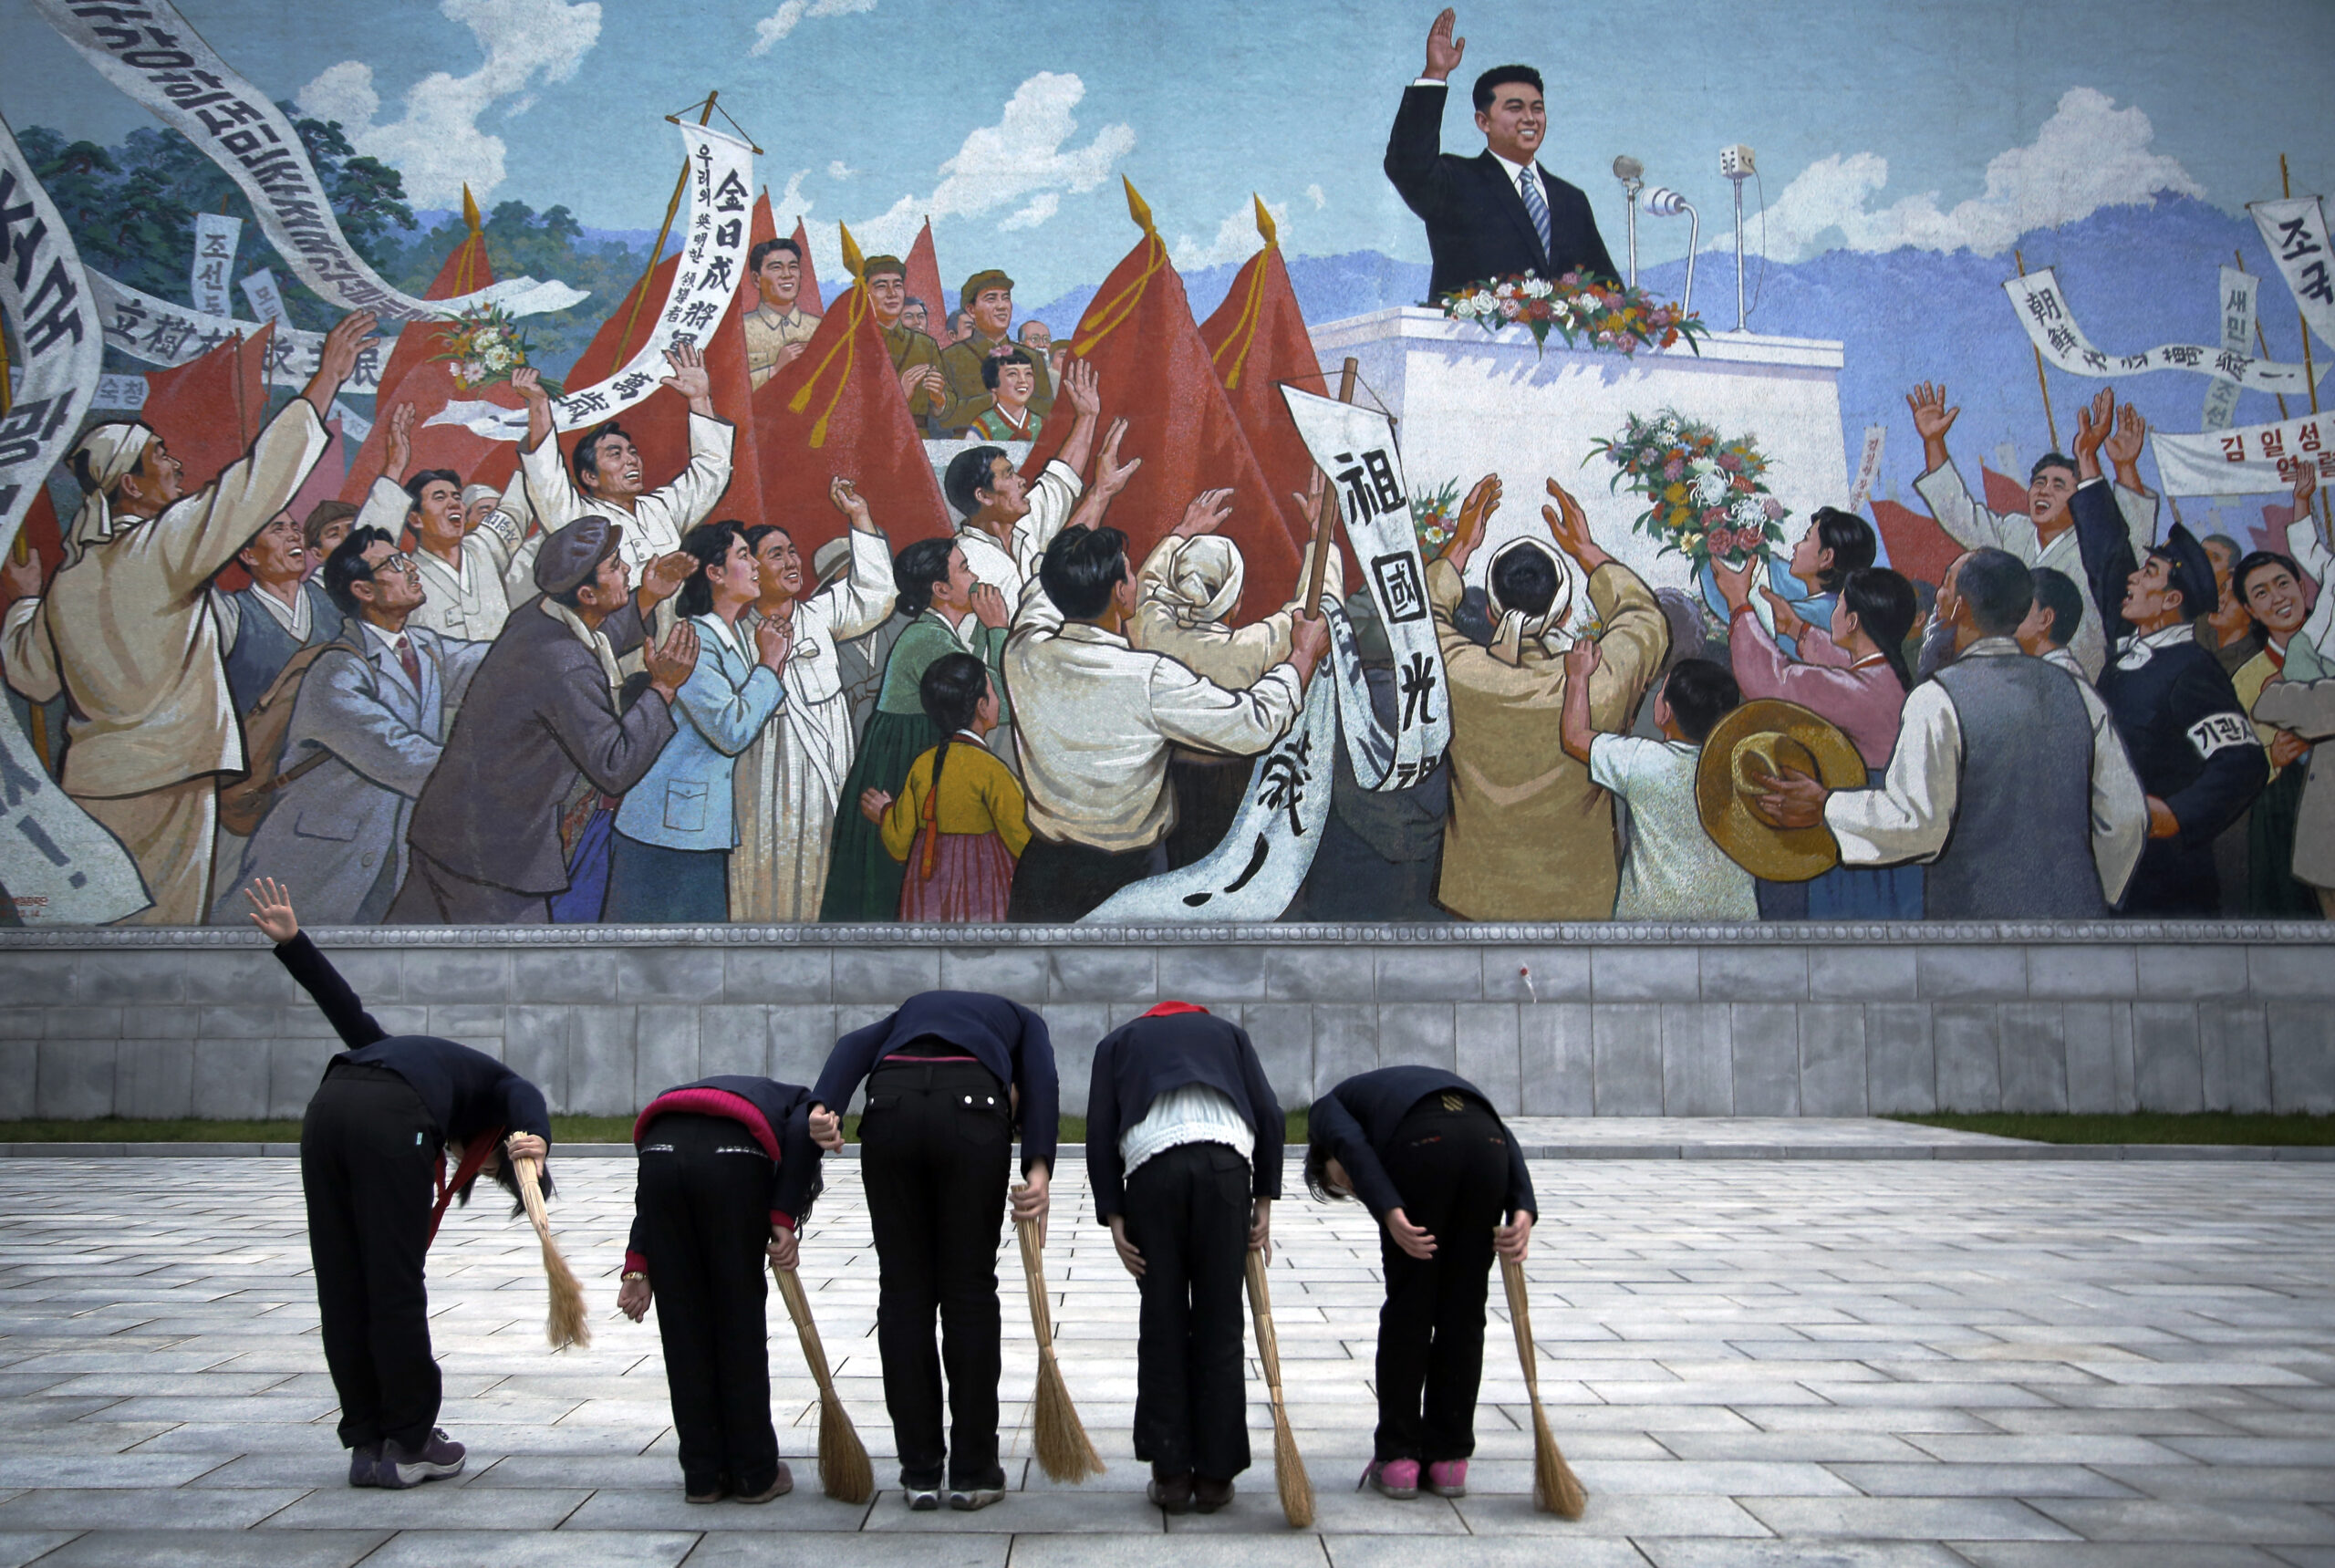 North Korean school girls holding brooms bow to pay their respects toward a mural which shows the late North Korean leader Kim Il Sung delivering a speech, before sweeping the area surrounding this mural on Tuesday, Dec. 1, 2015, in Pyongyang, North Korea, one of over 70 photos that will be on display at Objectifs in Singapore. (AP Photo/Wong Maye-E) 